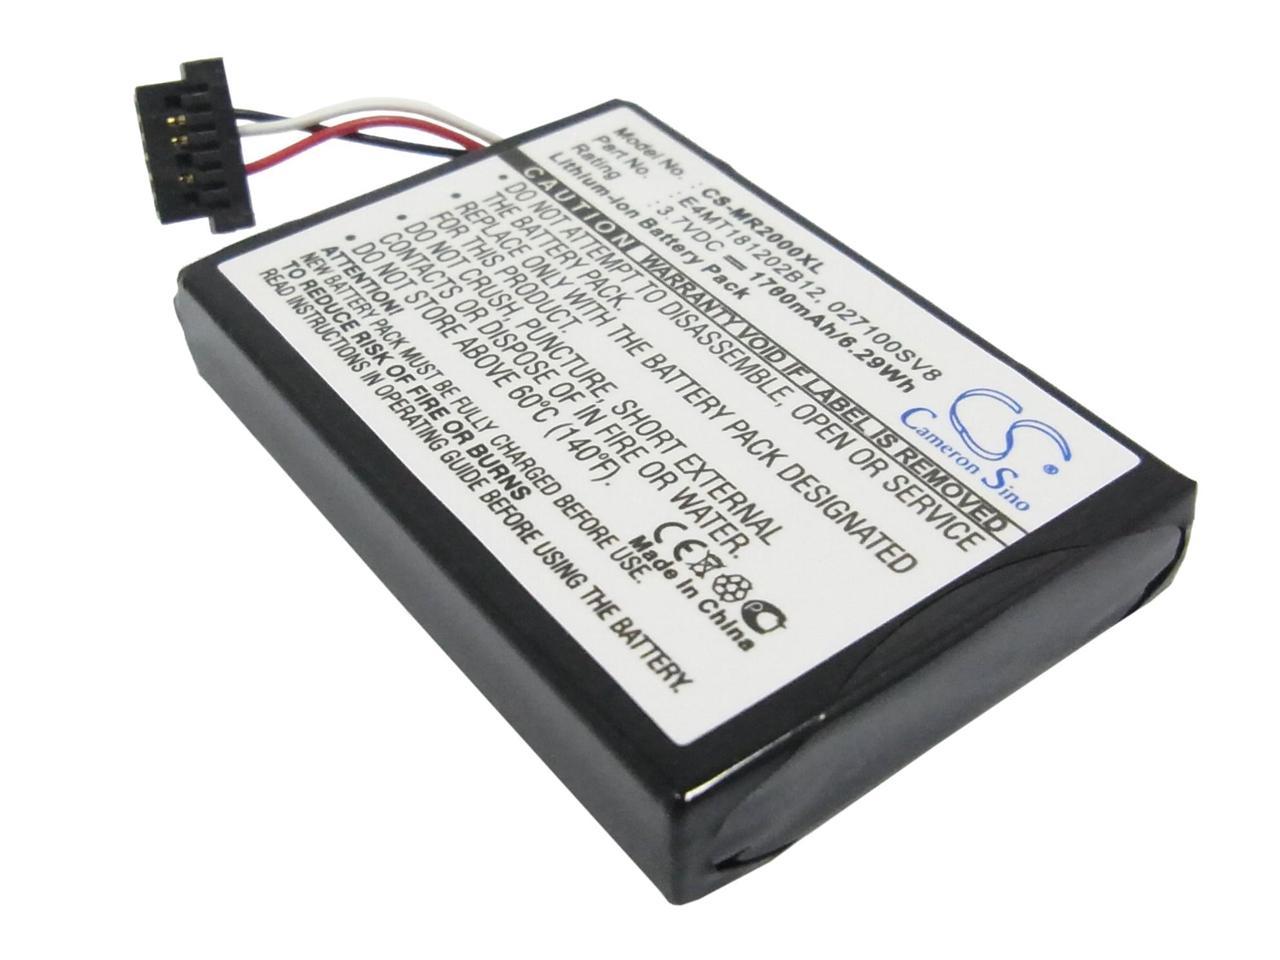 Cameron Sino Rechargeble Battery for Dogtra 2000T Receiver